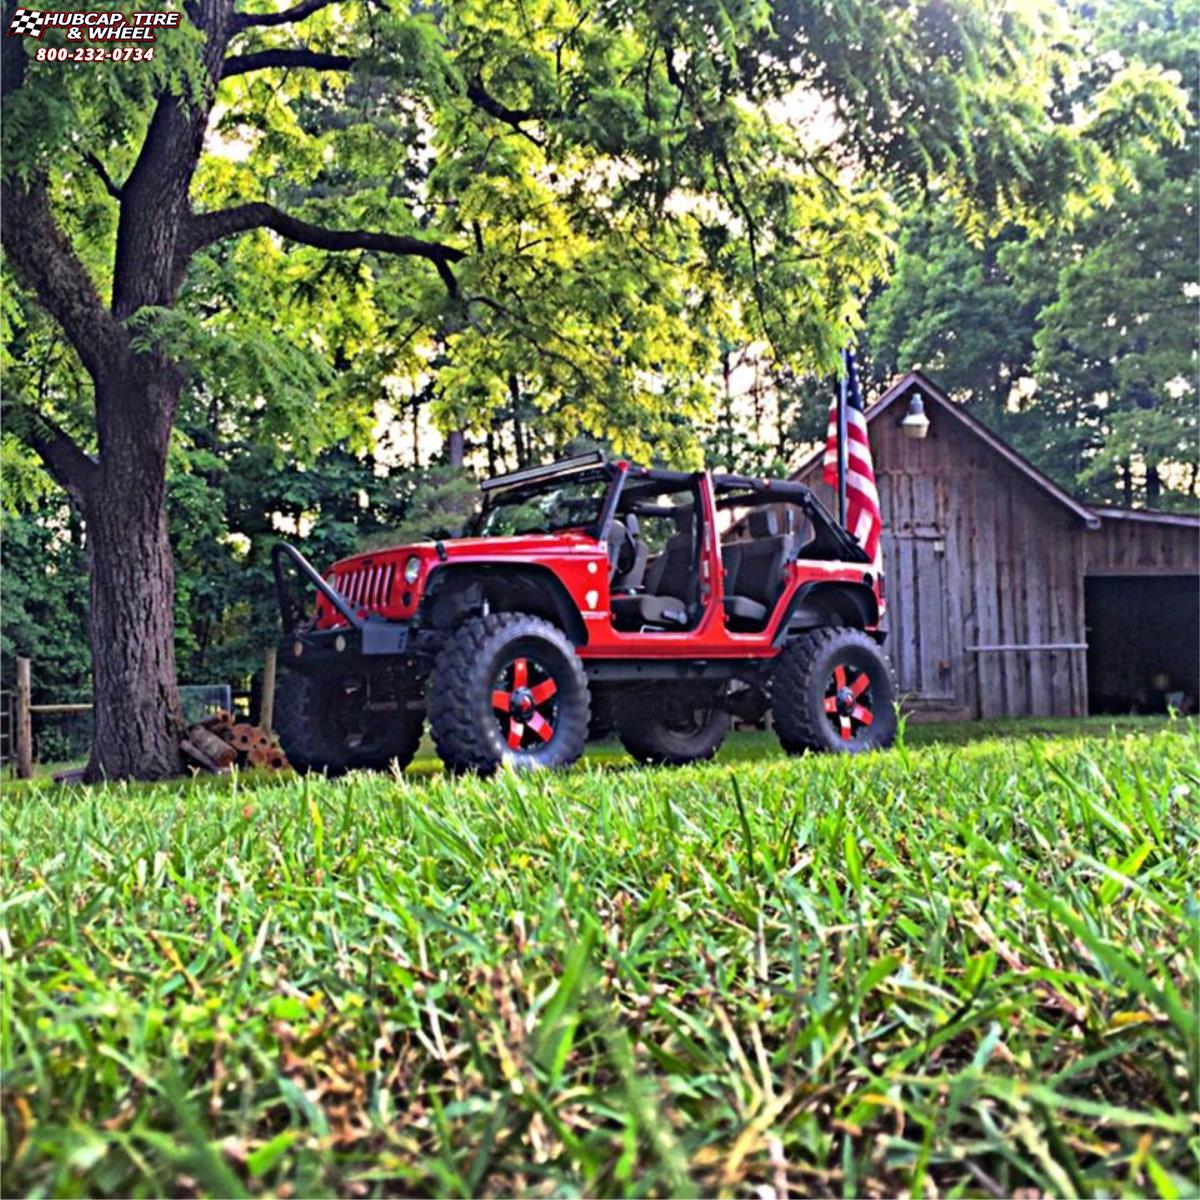 vehicle gallery/2008 jeep wrangler xd series xd775 rockstar 20x9  Matte Black Red wheels and rims